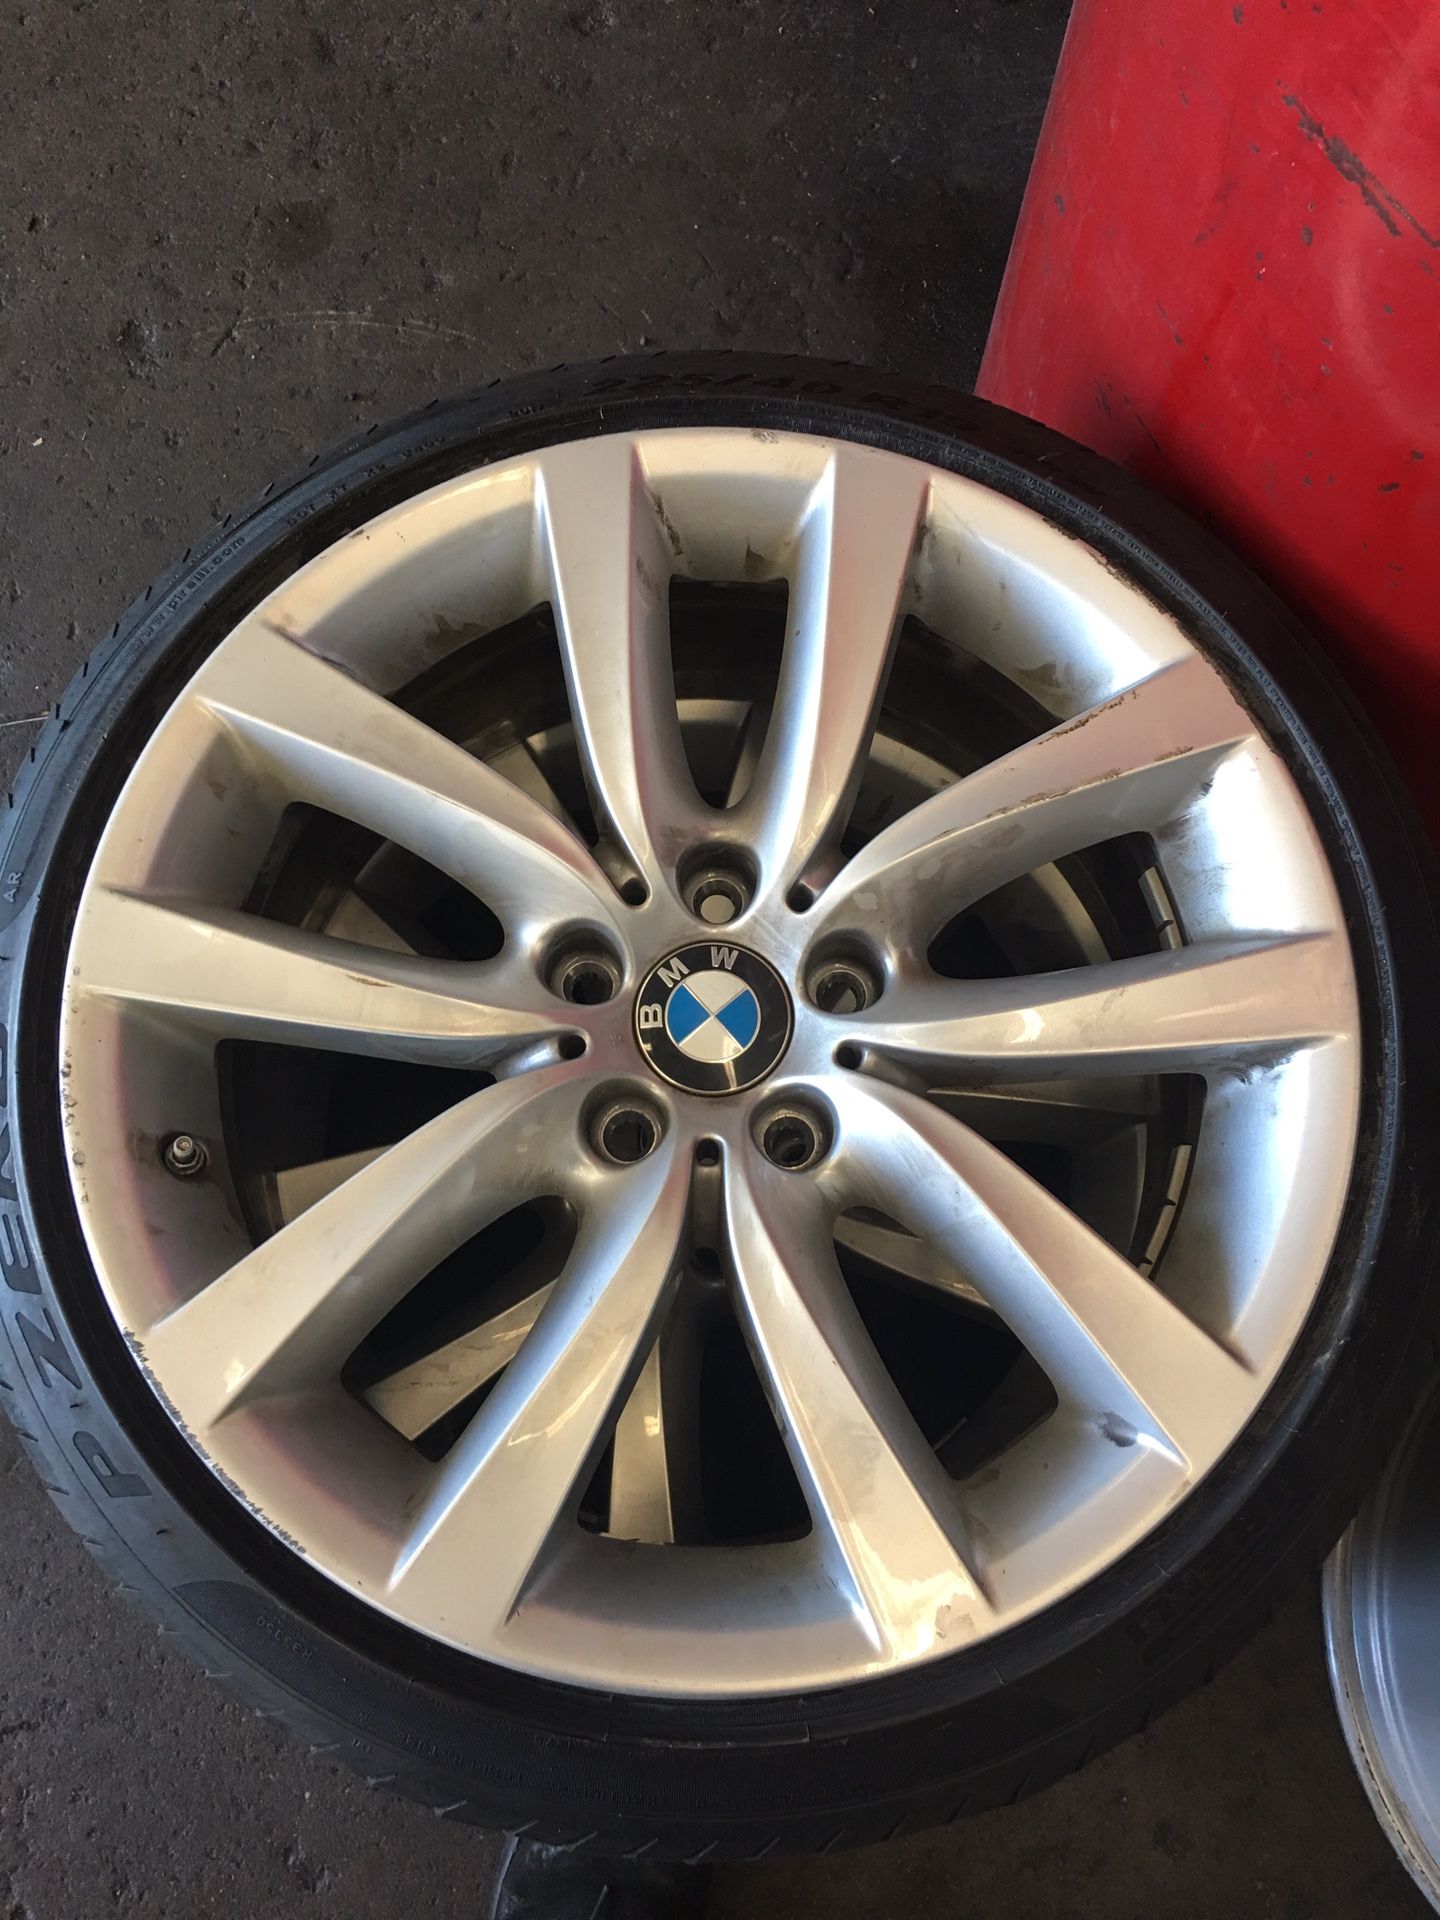 2013 BMW 530i staggered 19” rims